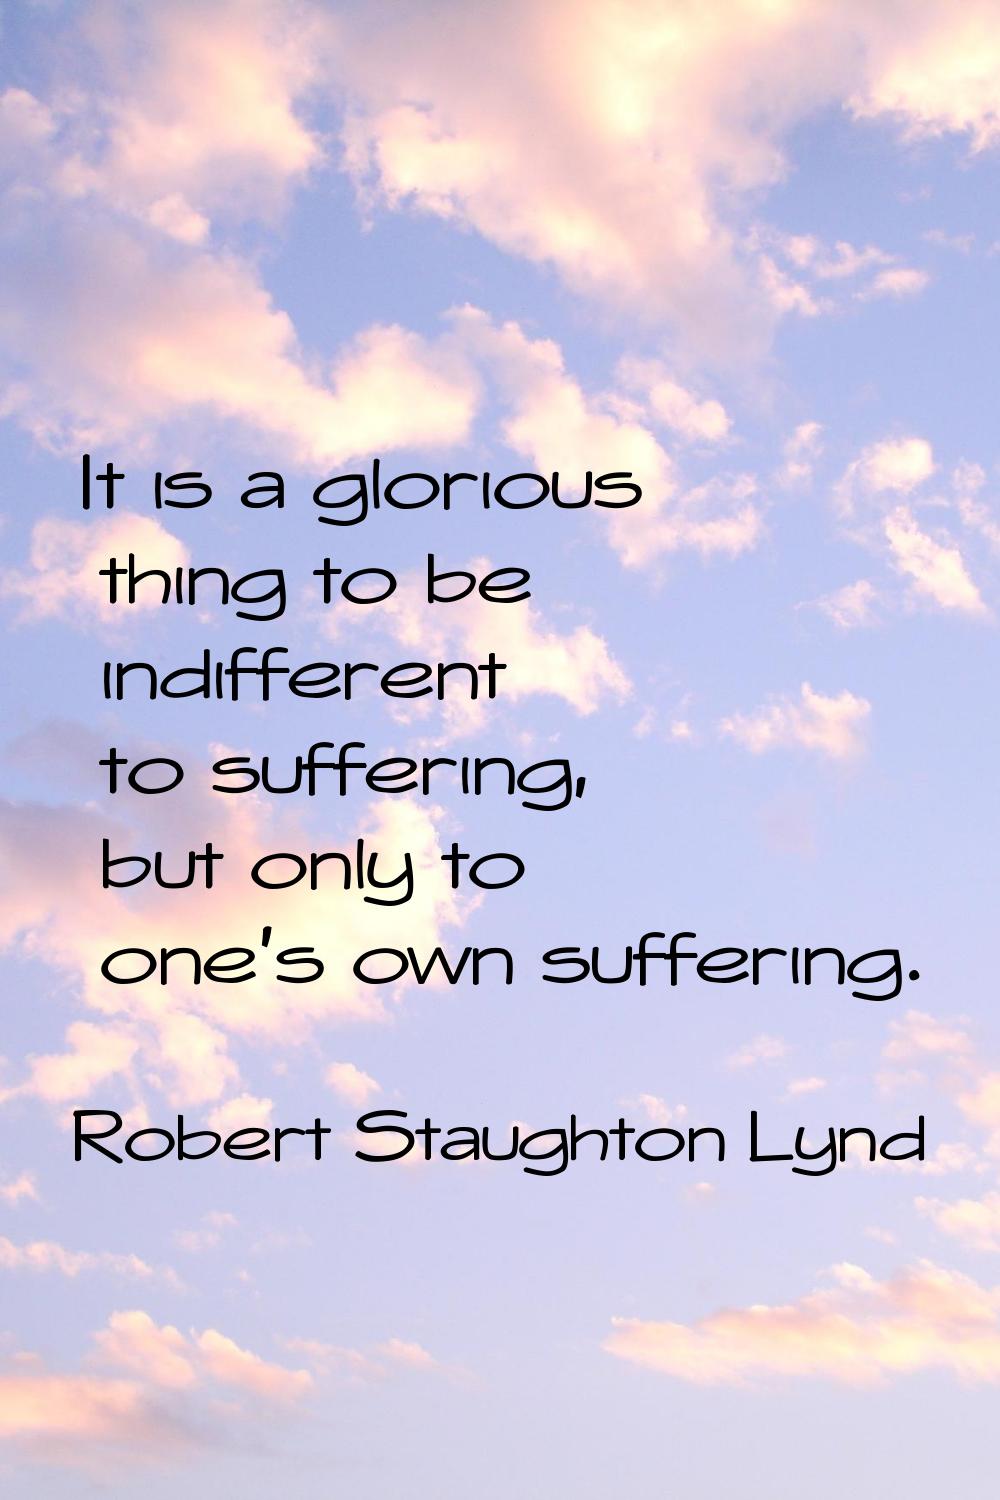 It is a glorious thing to be indifferent to suffering, but only to one's own suffering.